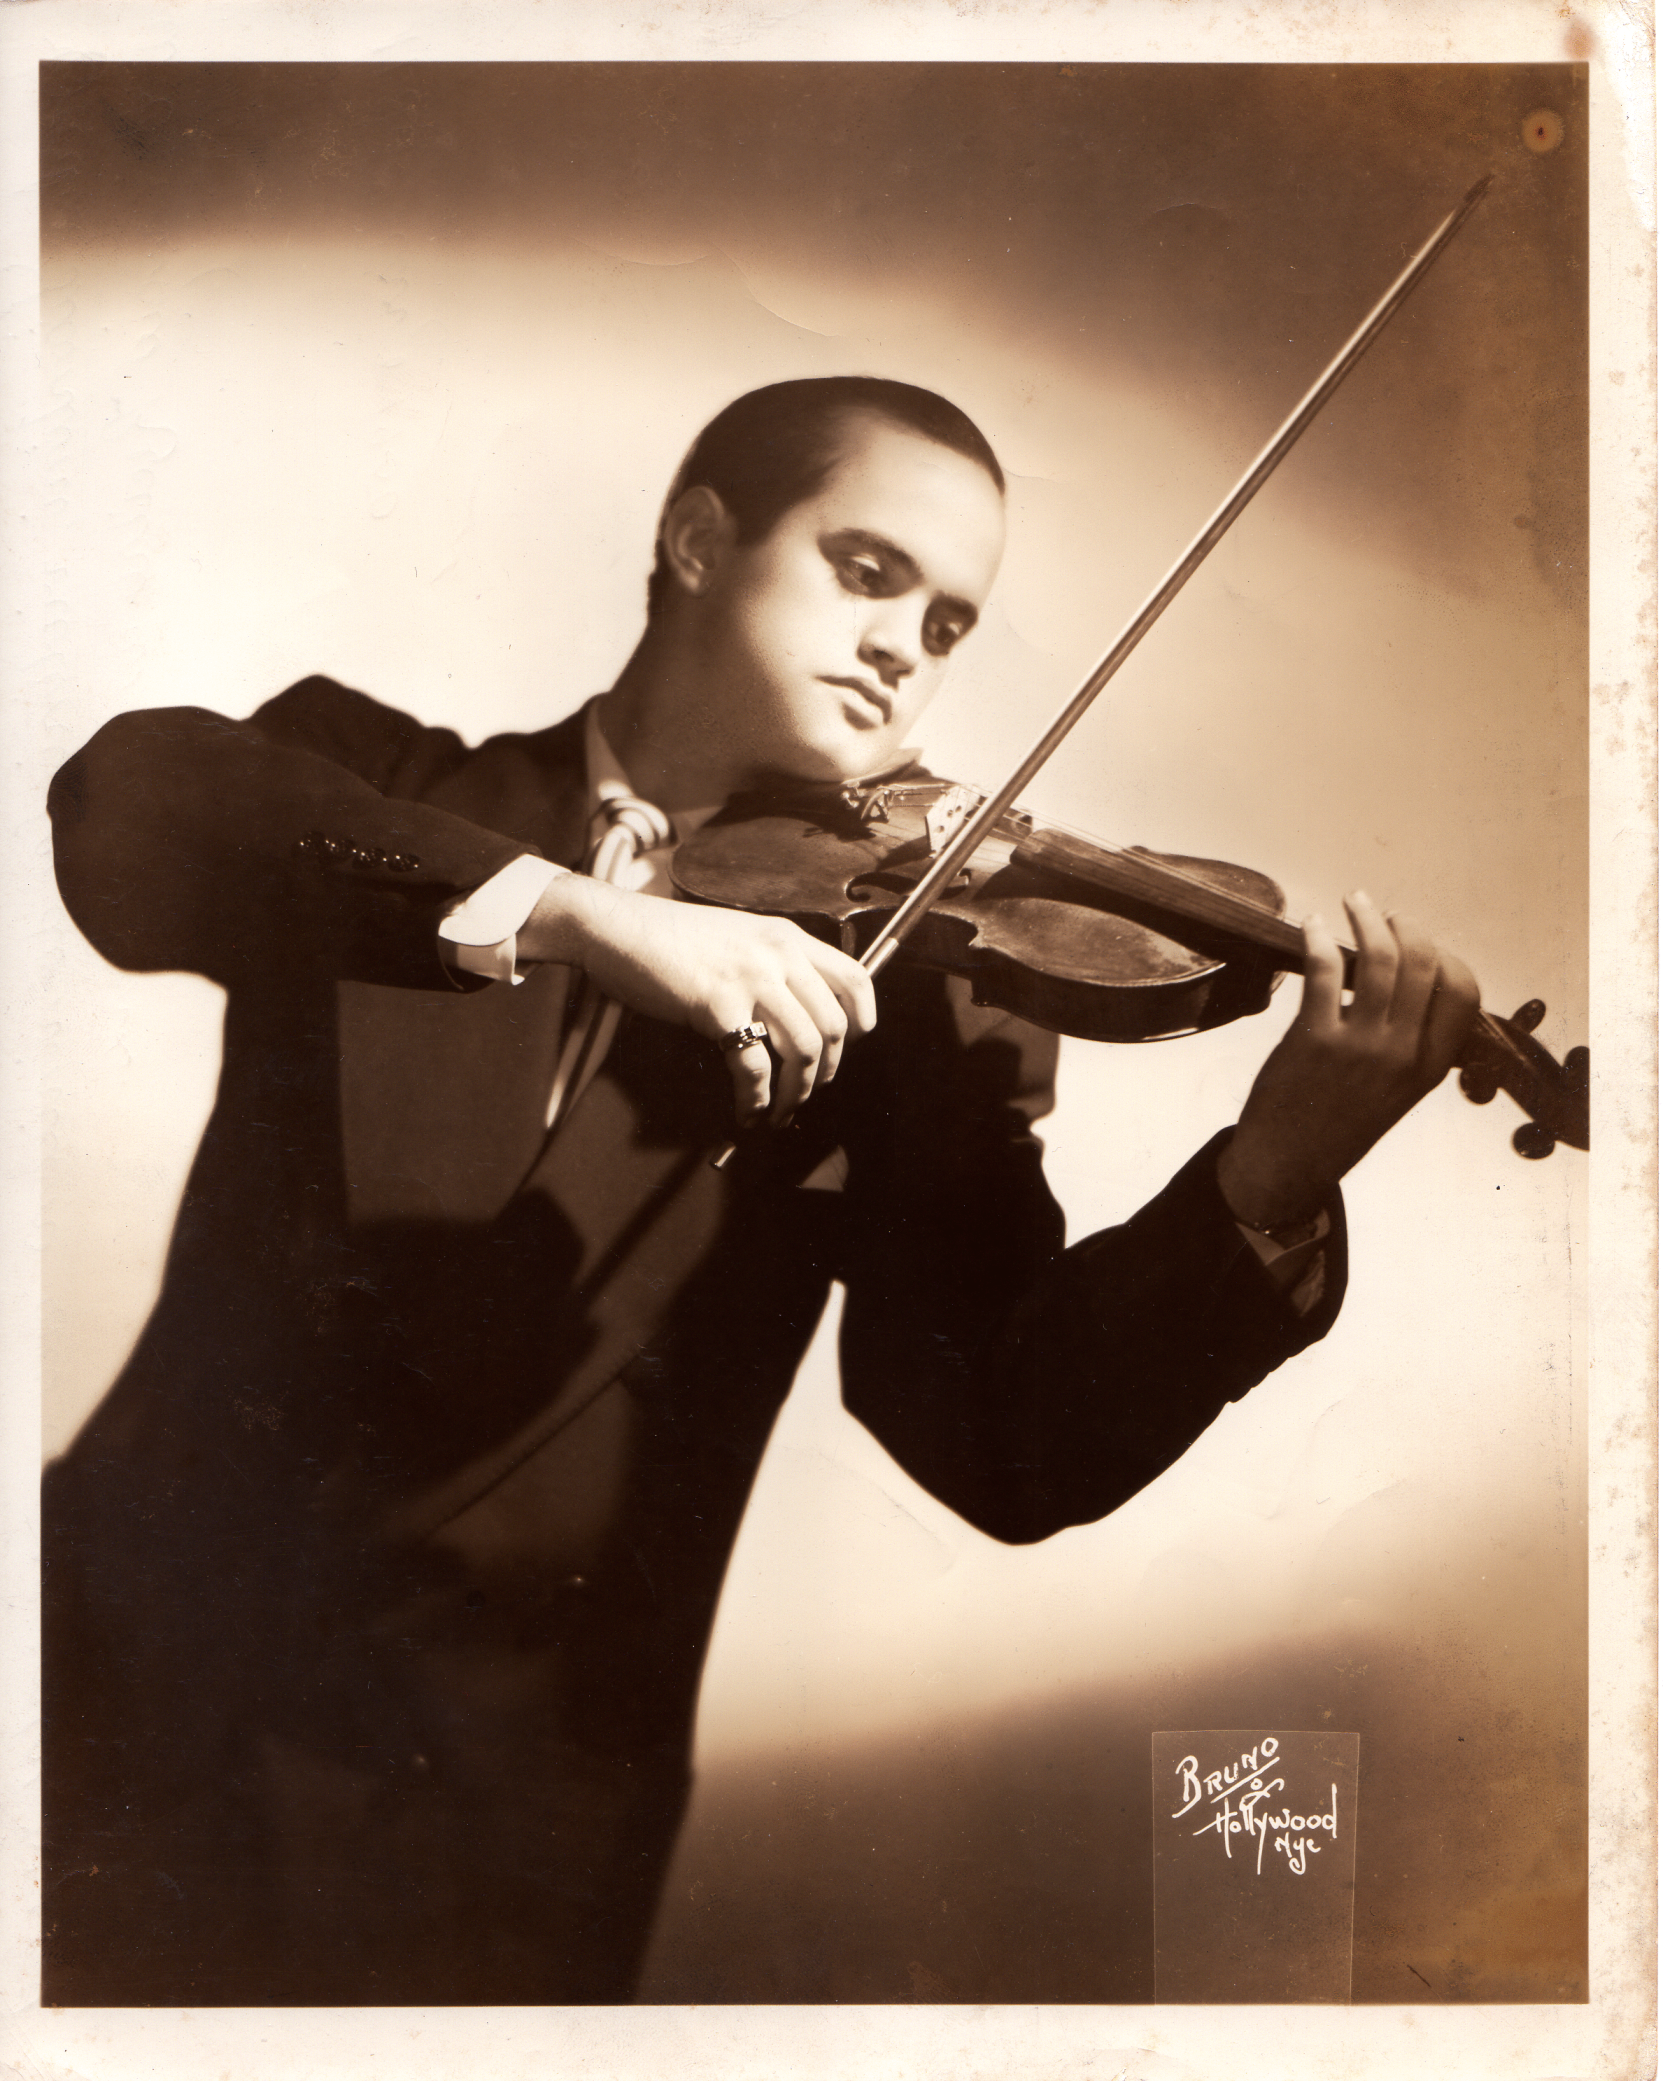 Dominican violinist Carlos Piantini debut at the Carnegie Recital Hall in New York., March 11, 1950